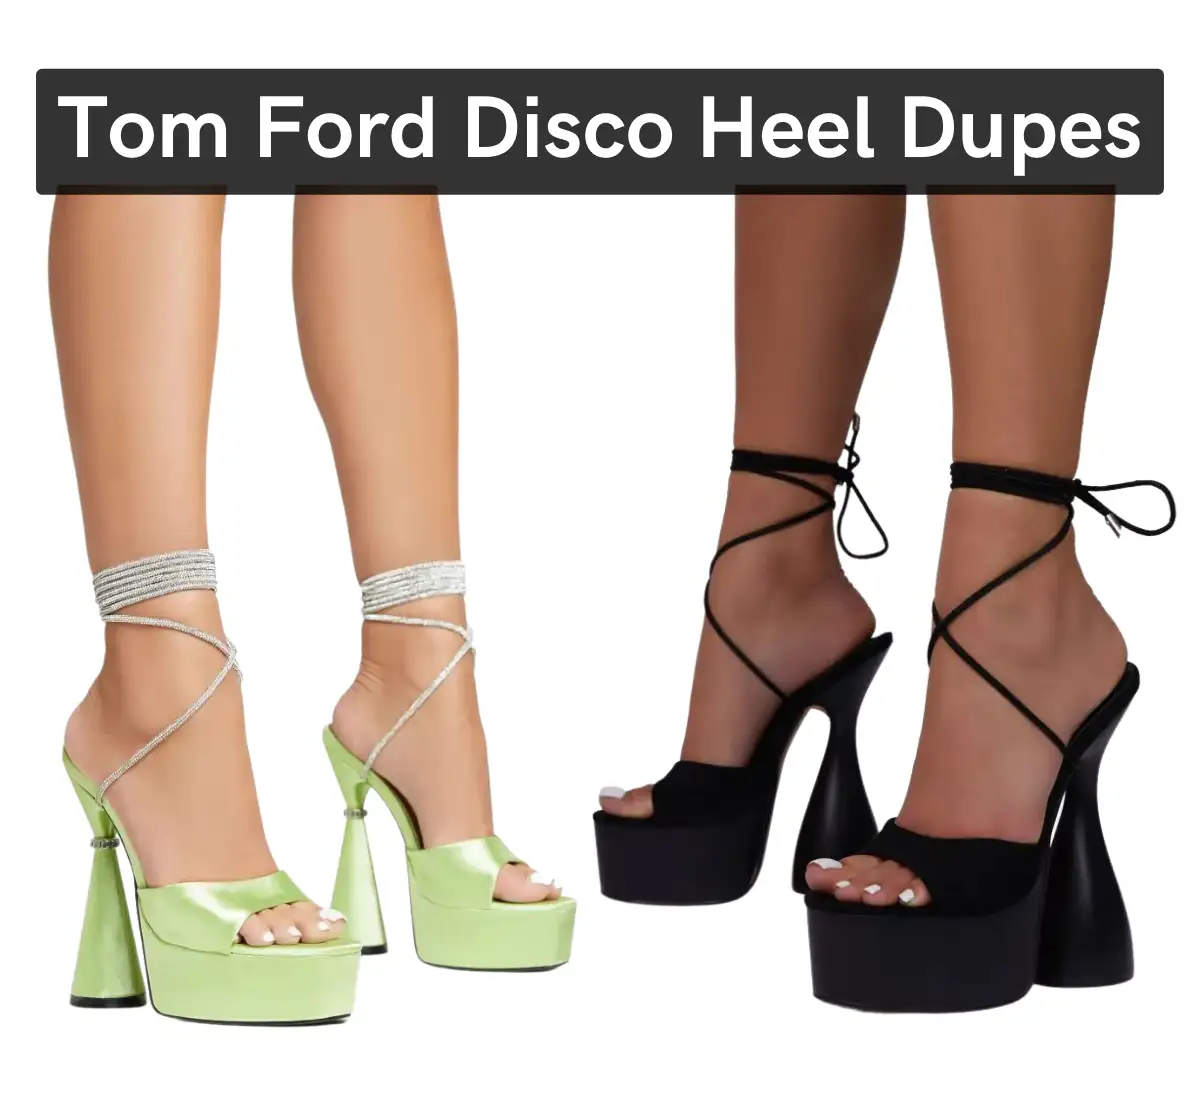 The best tom ford disco heels dupes (from $23)